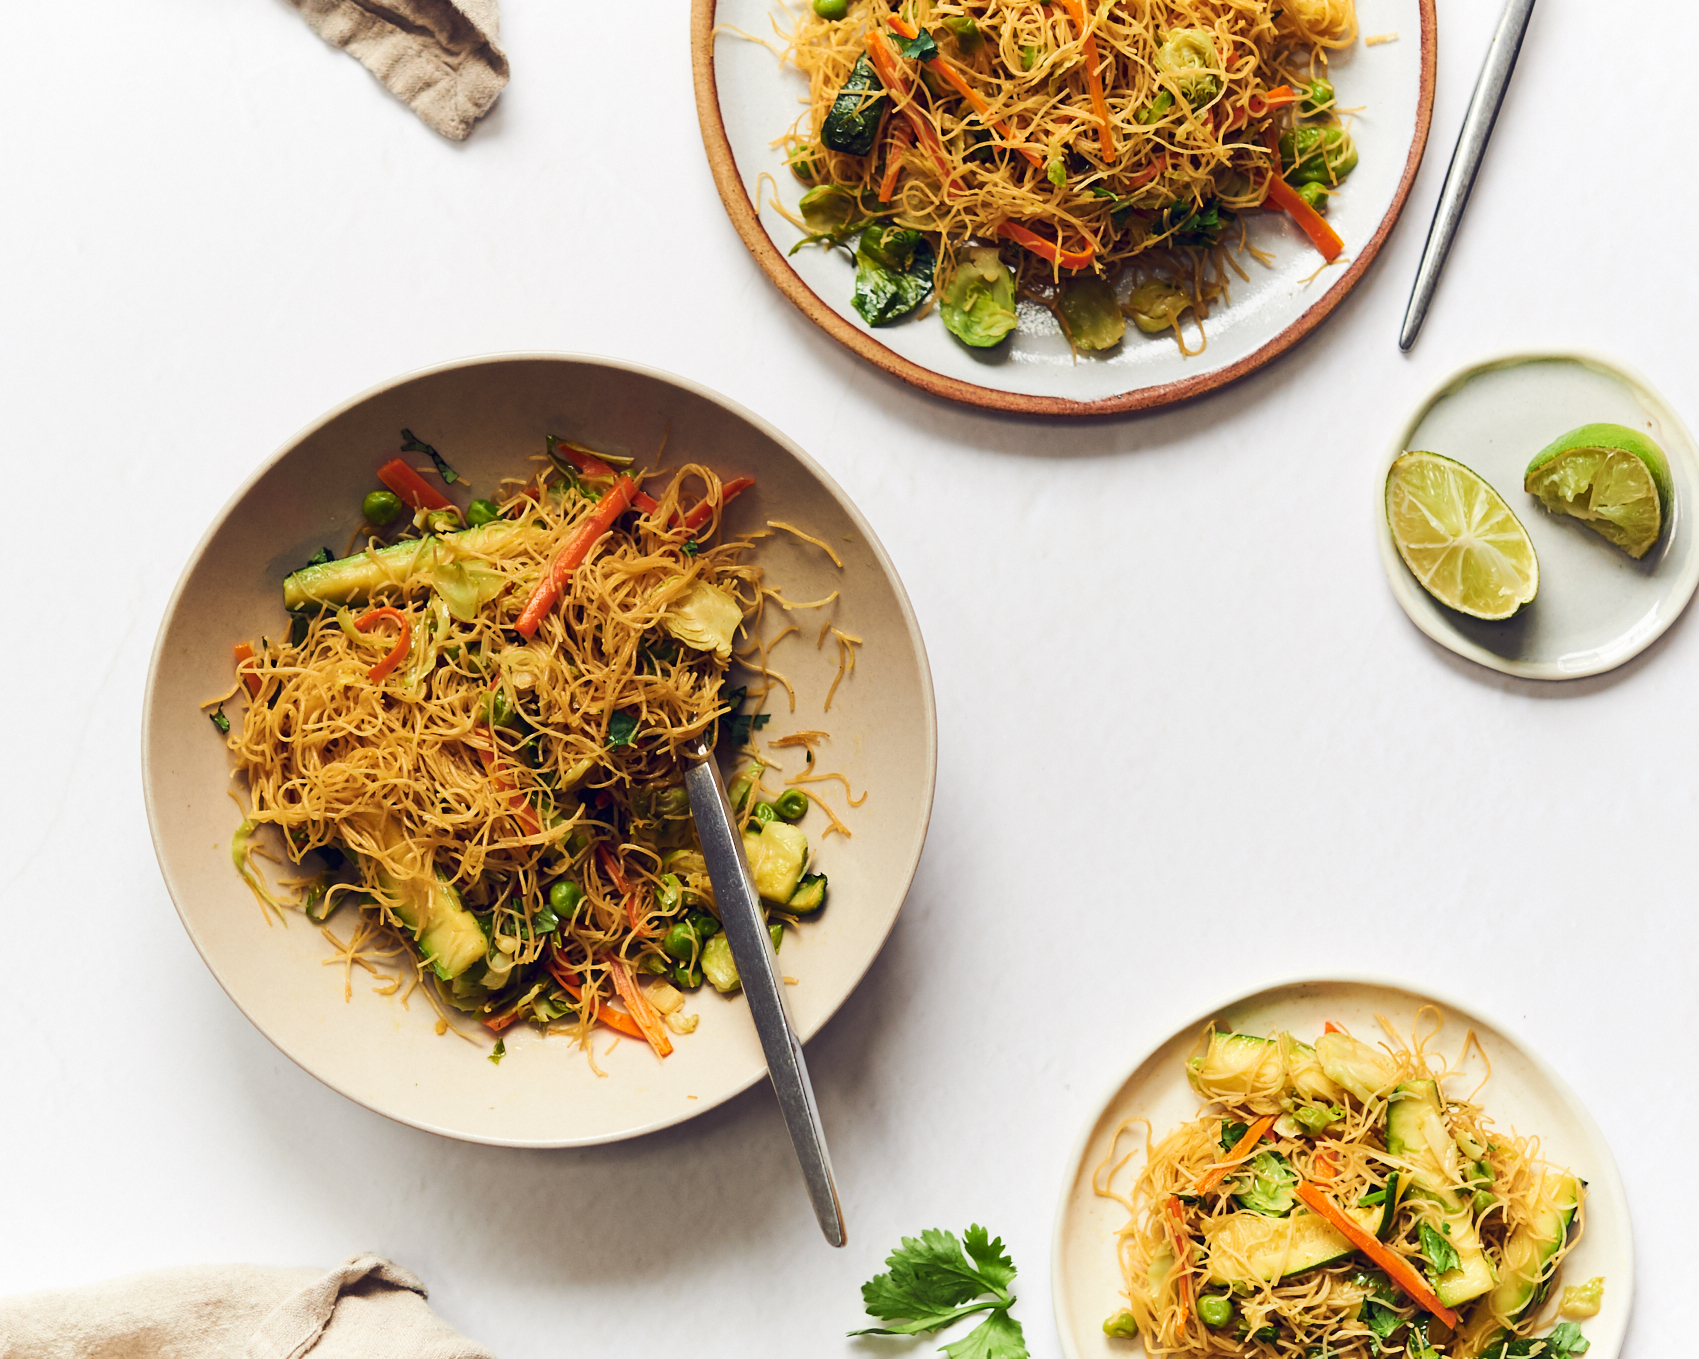 This stir fry is made with rice vermicelli noodles and lots of vegetables. It's vegan, but can also be made gluten free, grain free and carb free.